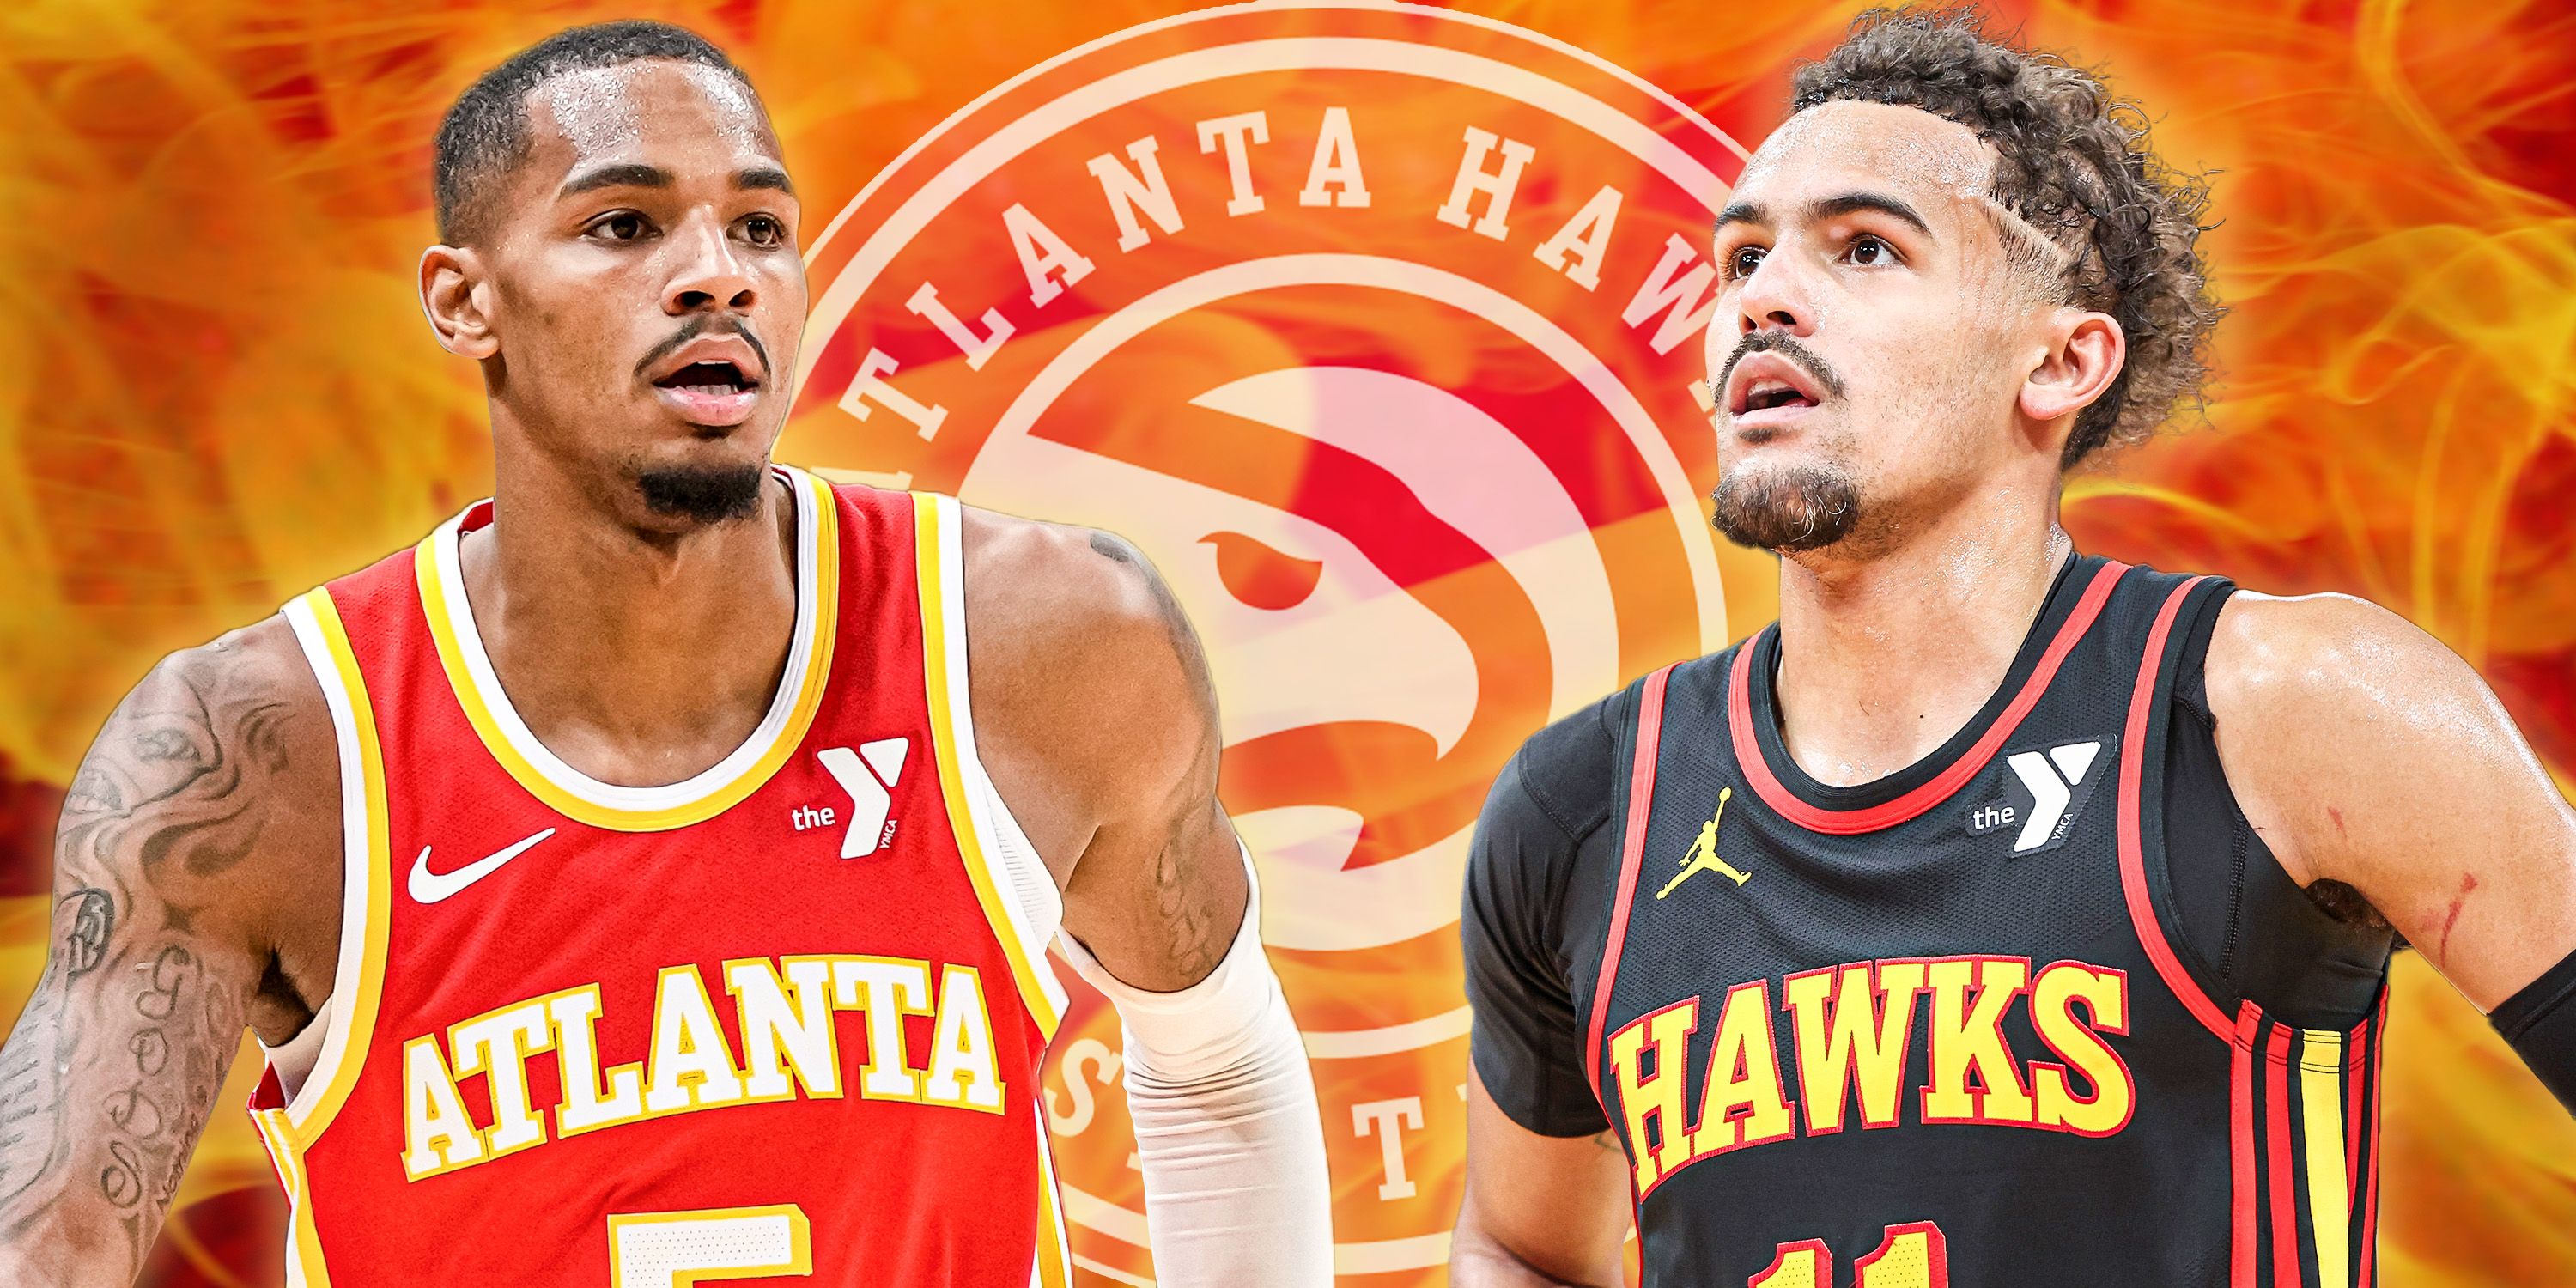 It's time for the Atlanta Hawks to push for a full rebuild